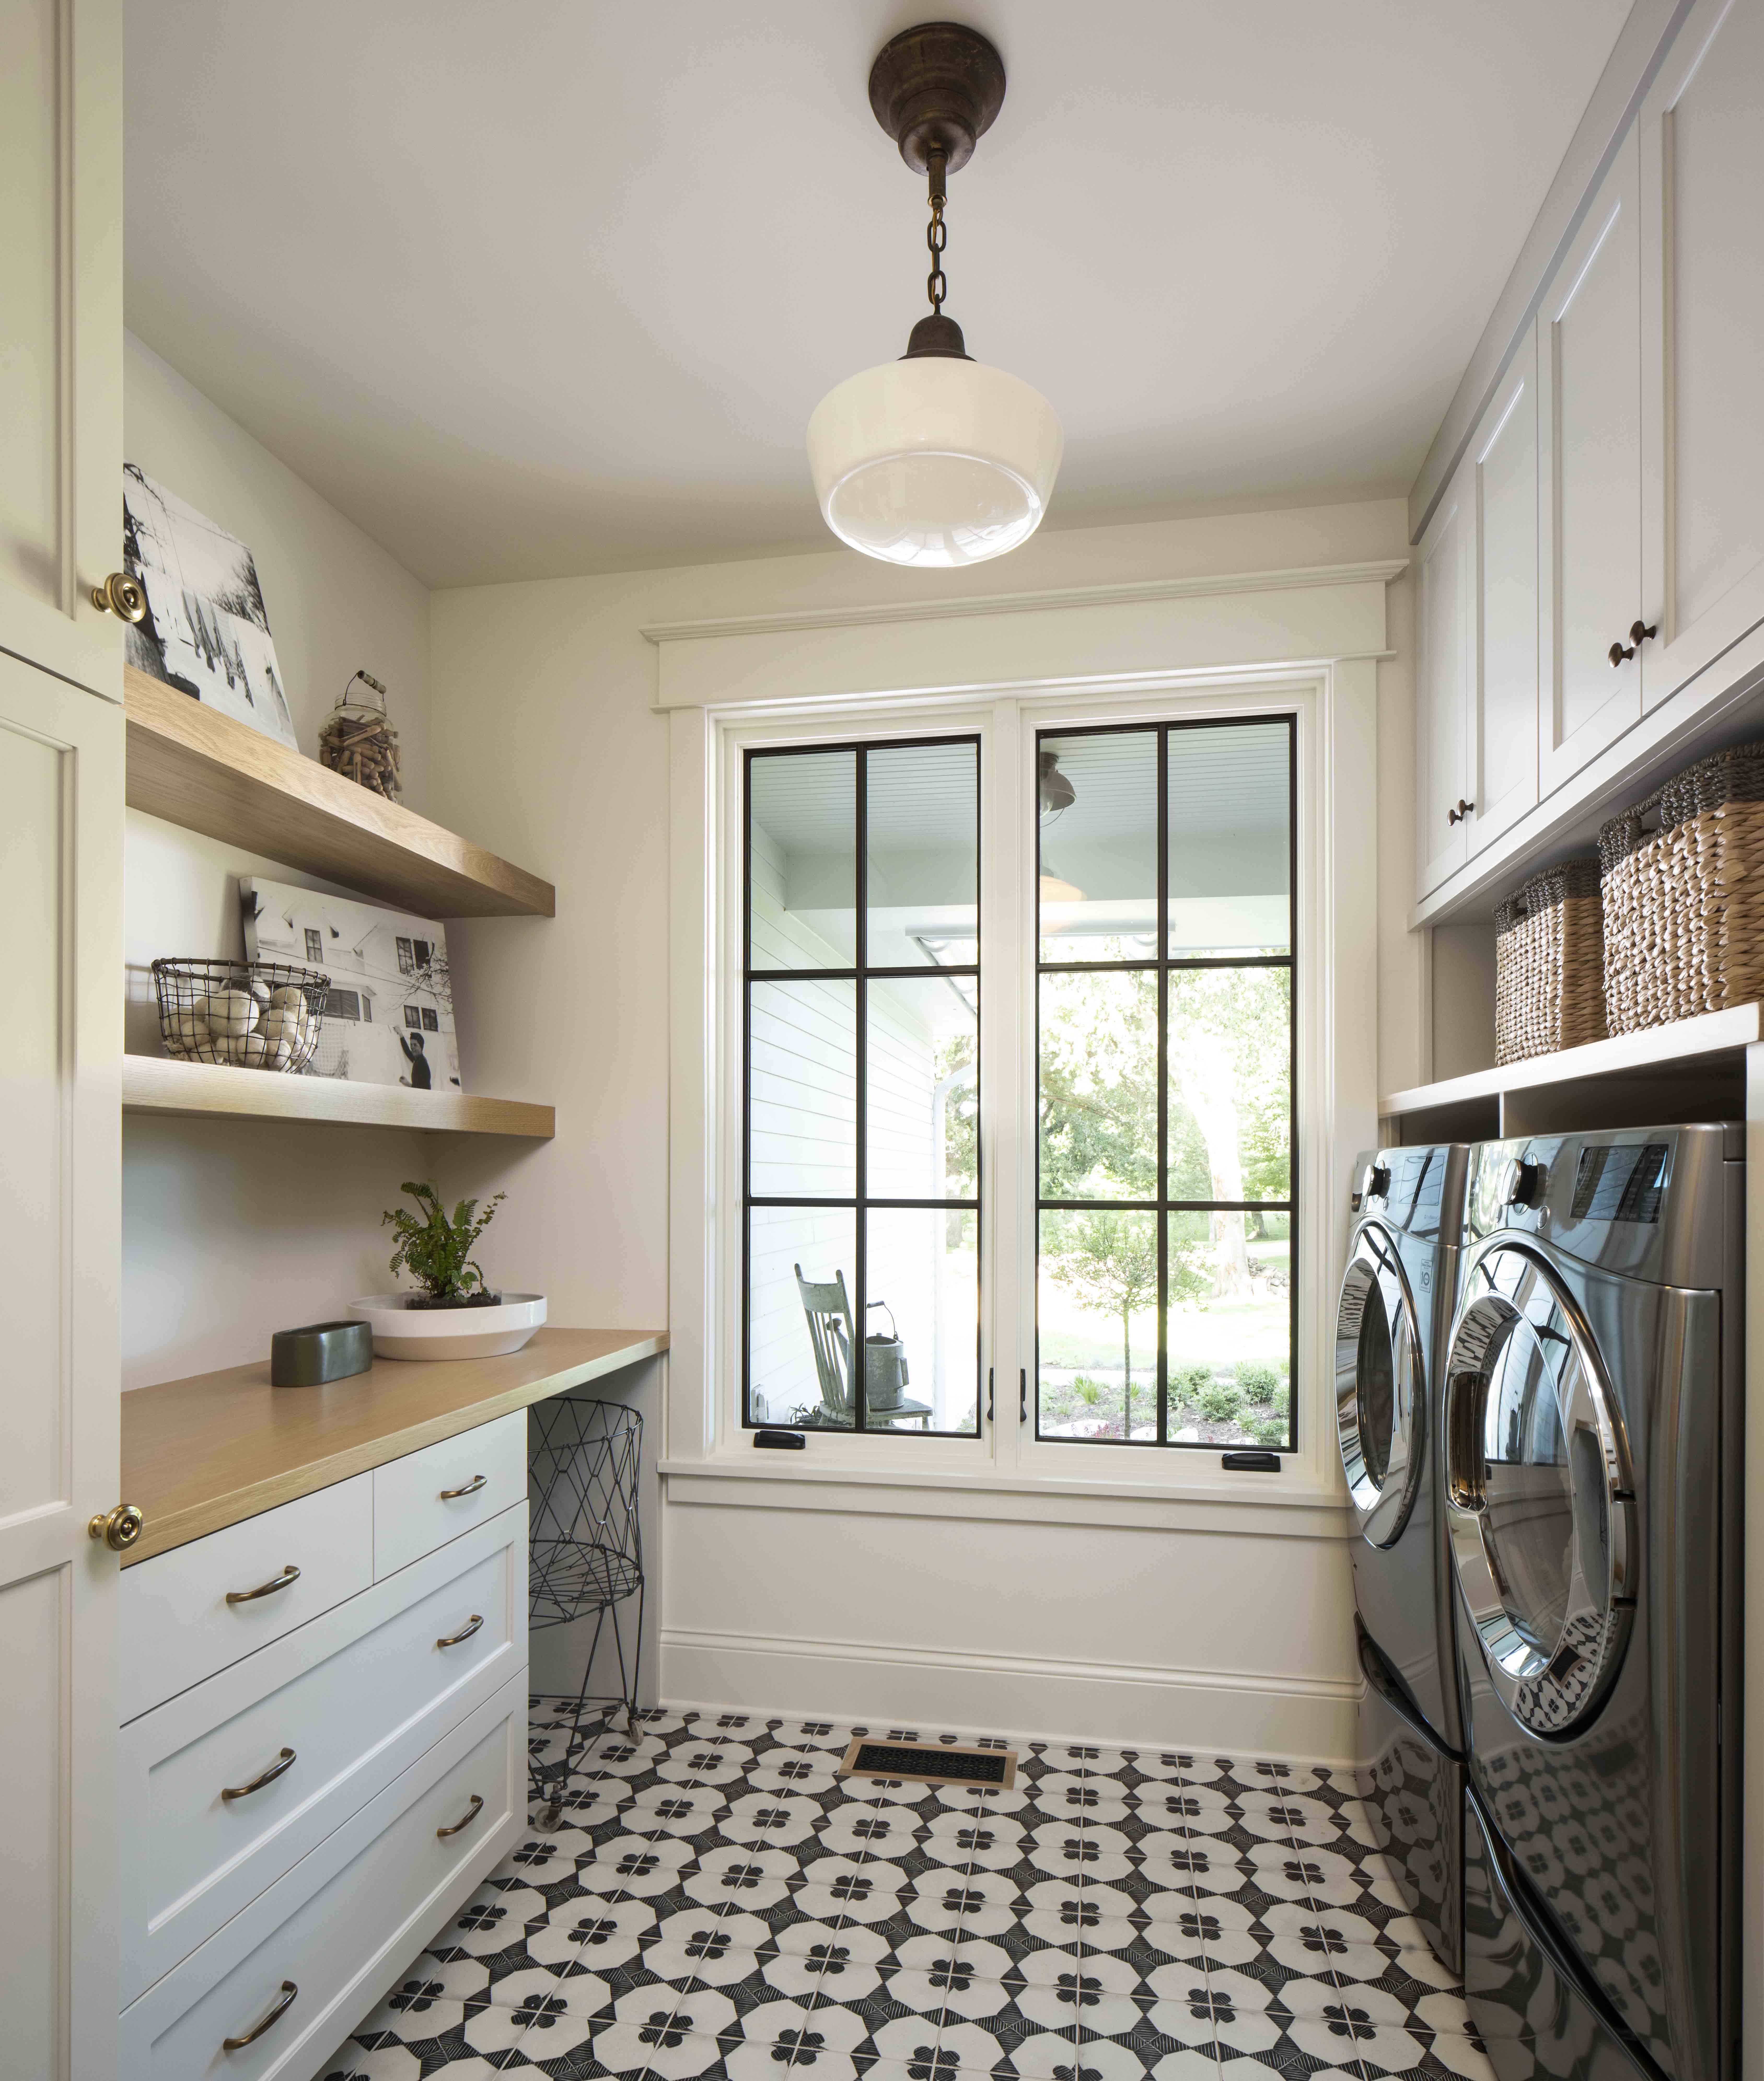 A prairie-style transitional custom home with a laundry room equipped with a washer and dryer.